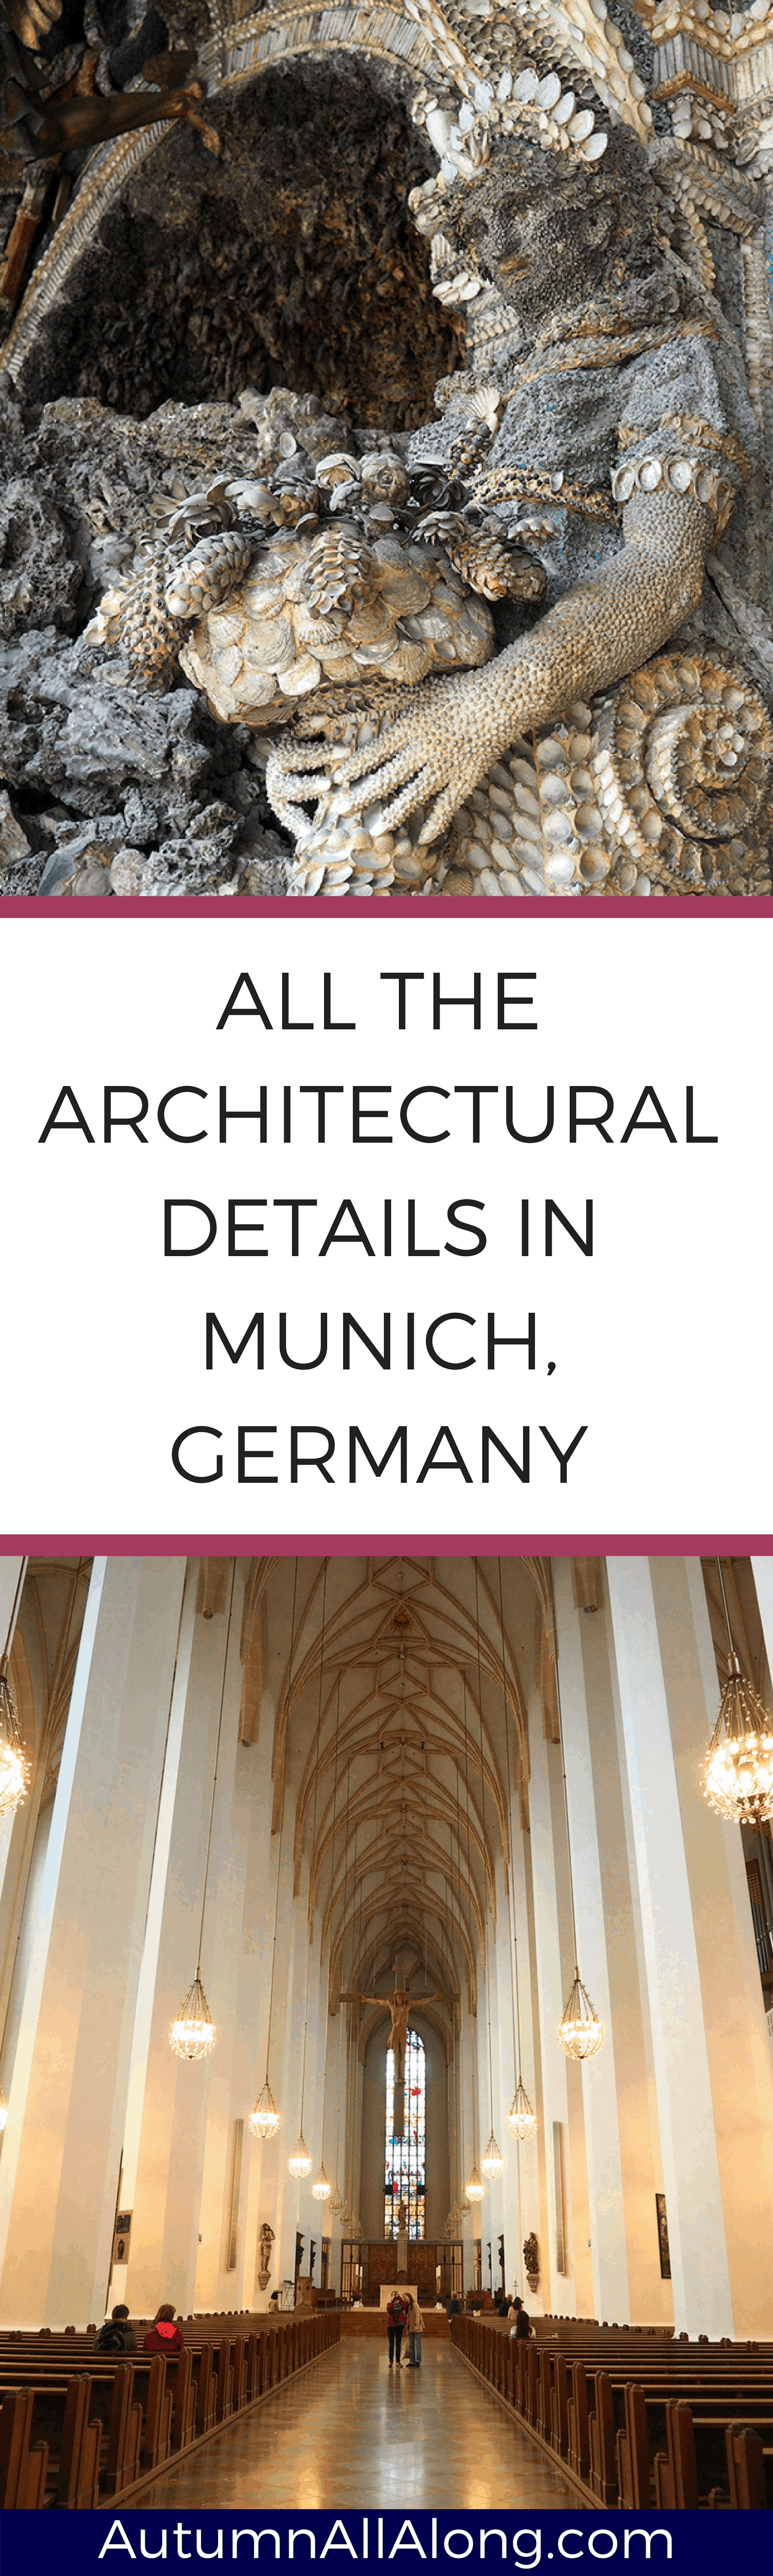 Exploring Munich, Germany showed us how many beautiful architectural details there are in Bavaria! | via Autumn All Along